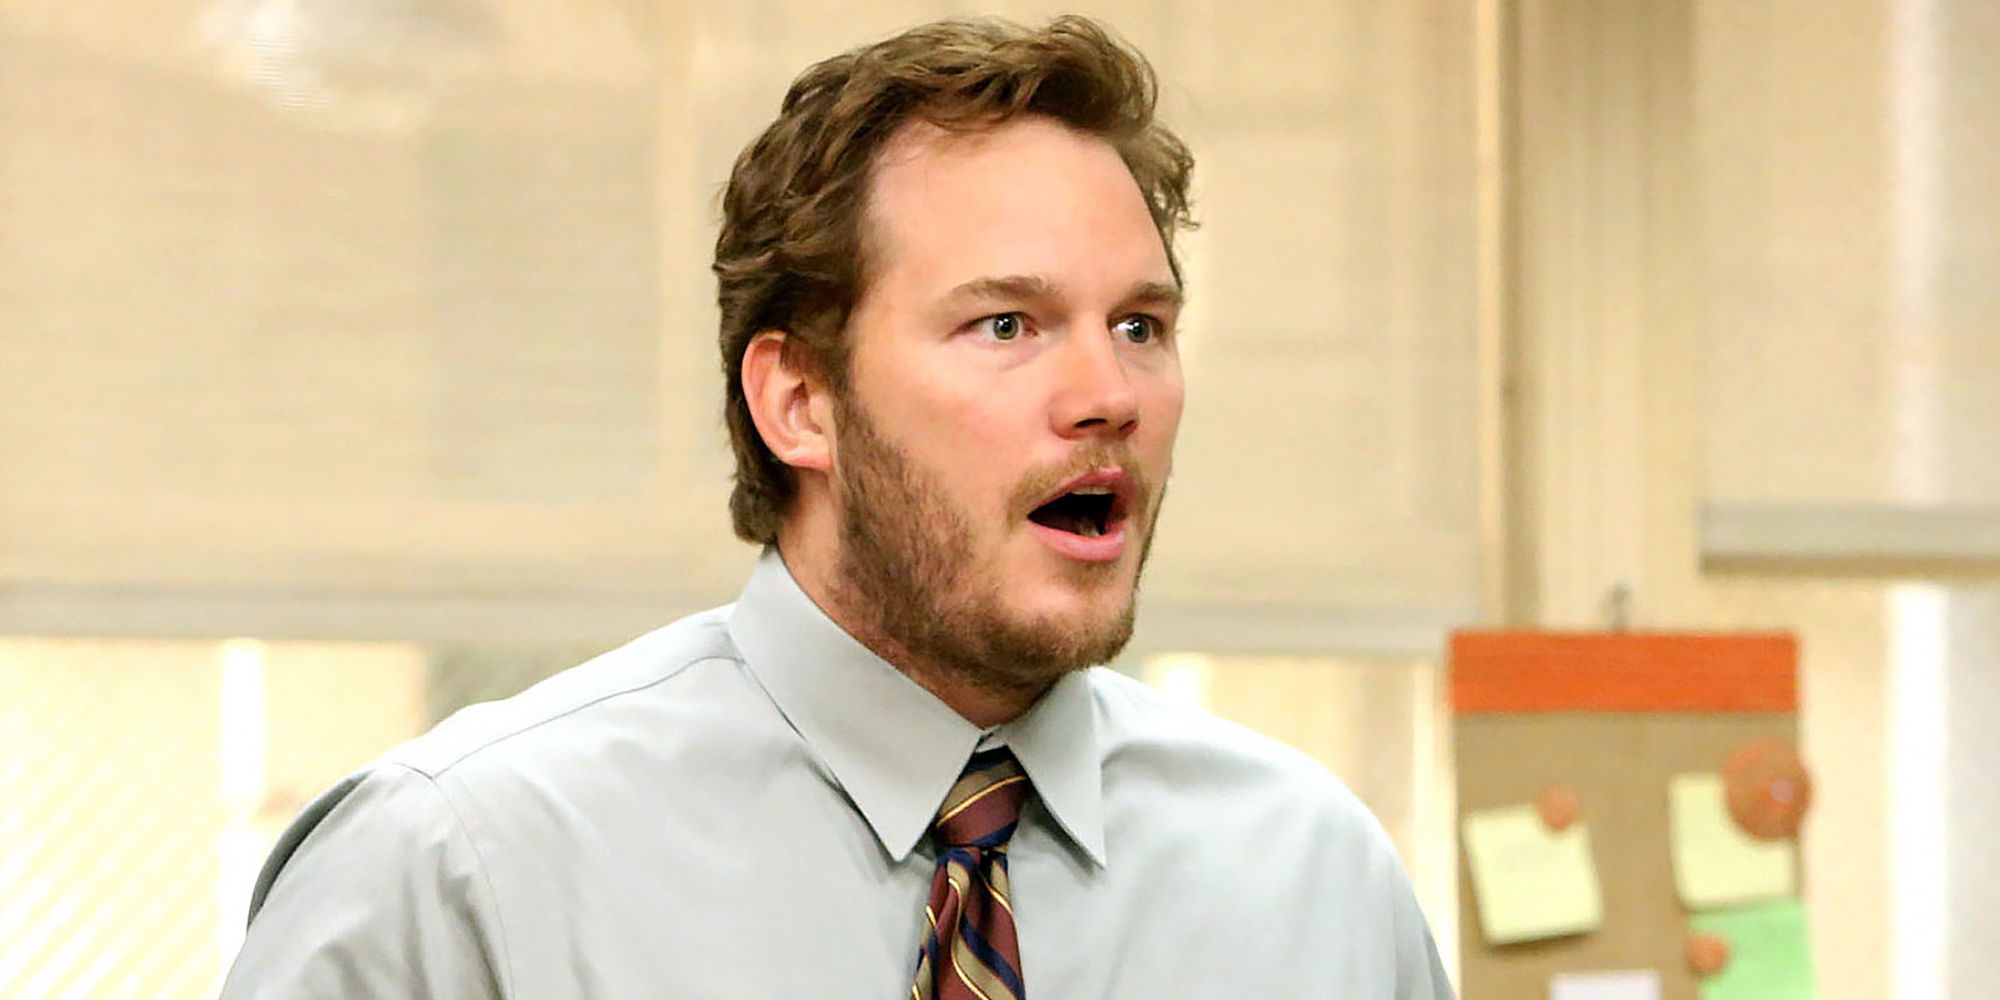 Chris Pratt as Andy Dwyer in Parks and Rec